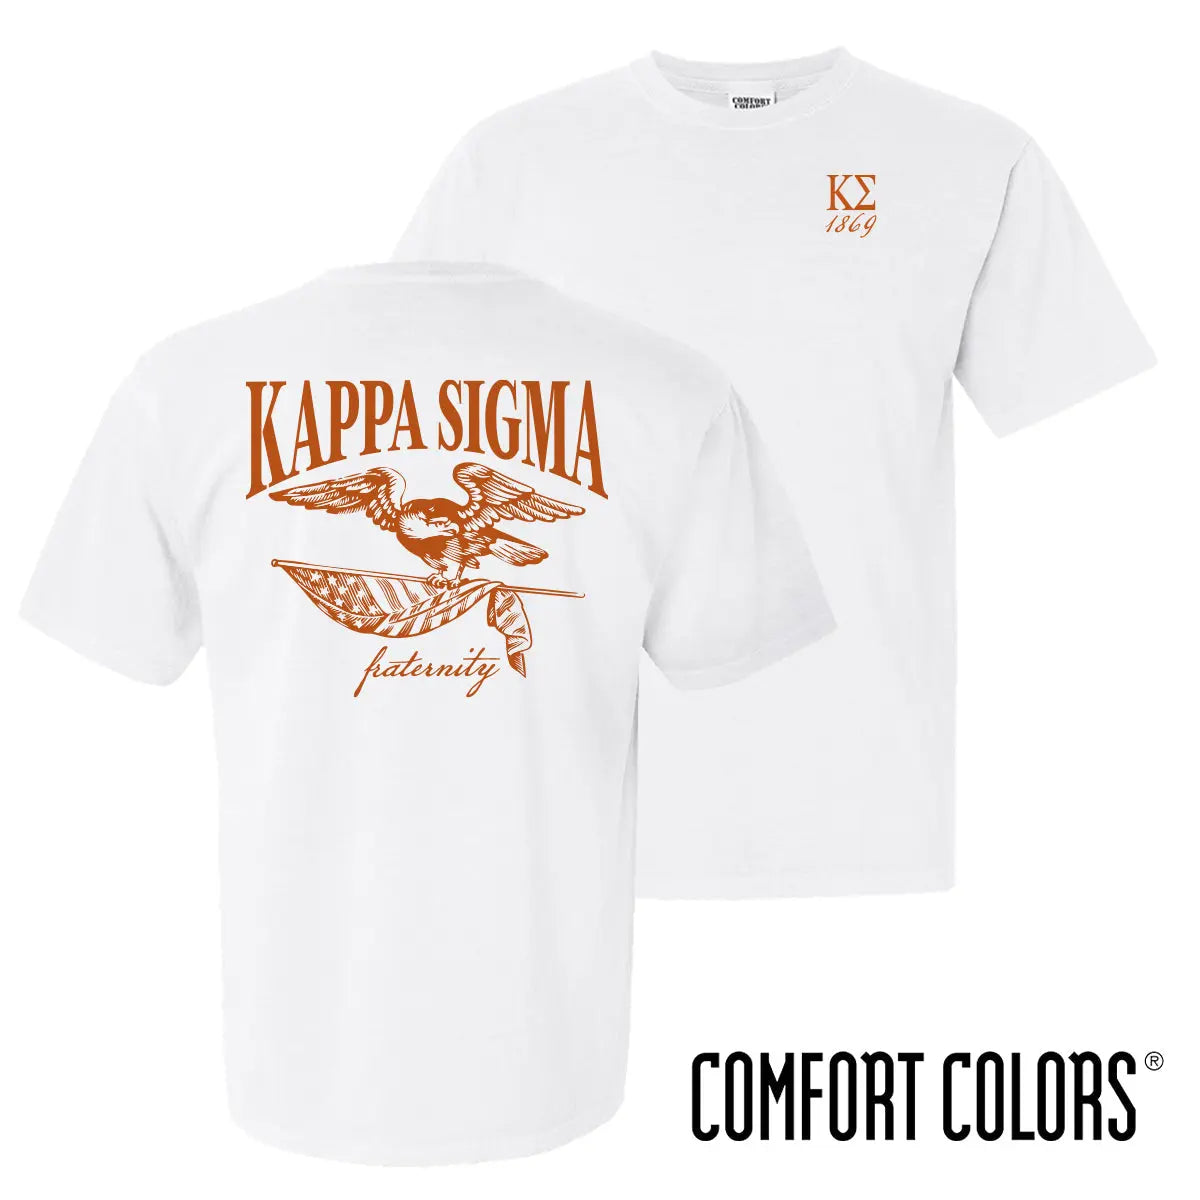 Kappa Sig Comfort Colors Freedom White Short Sleeve Tee - Kappa Sigma Official Store